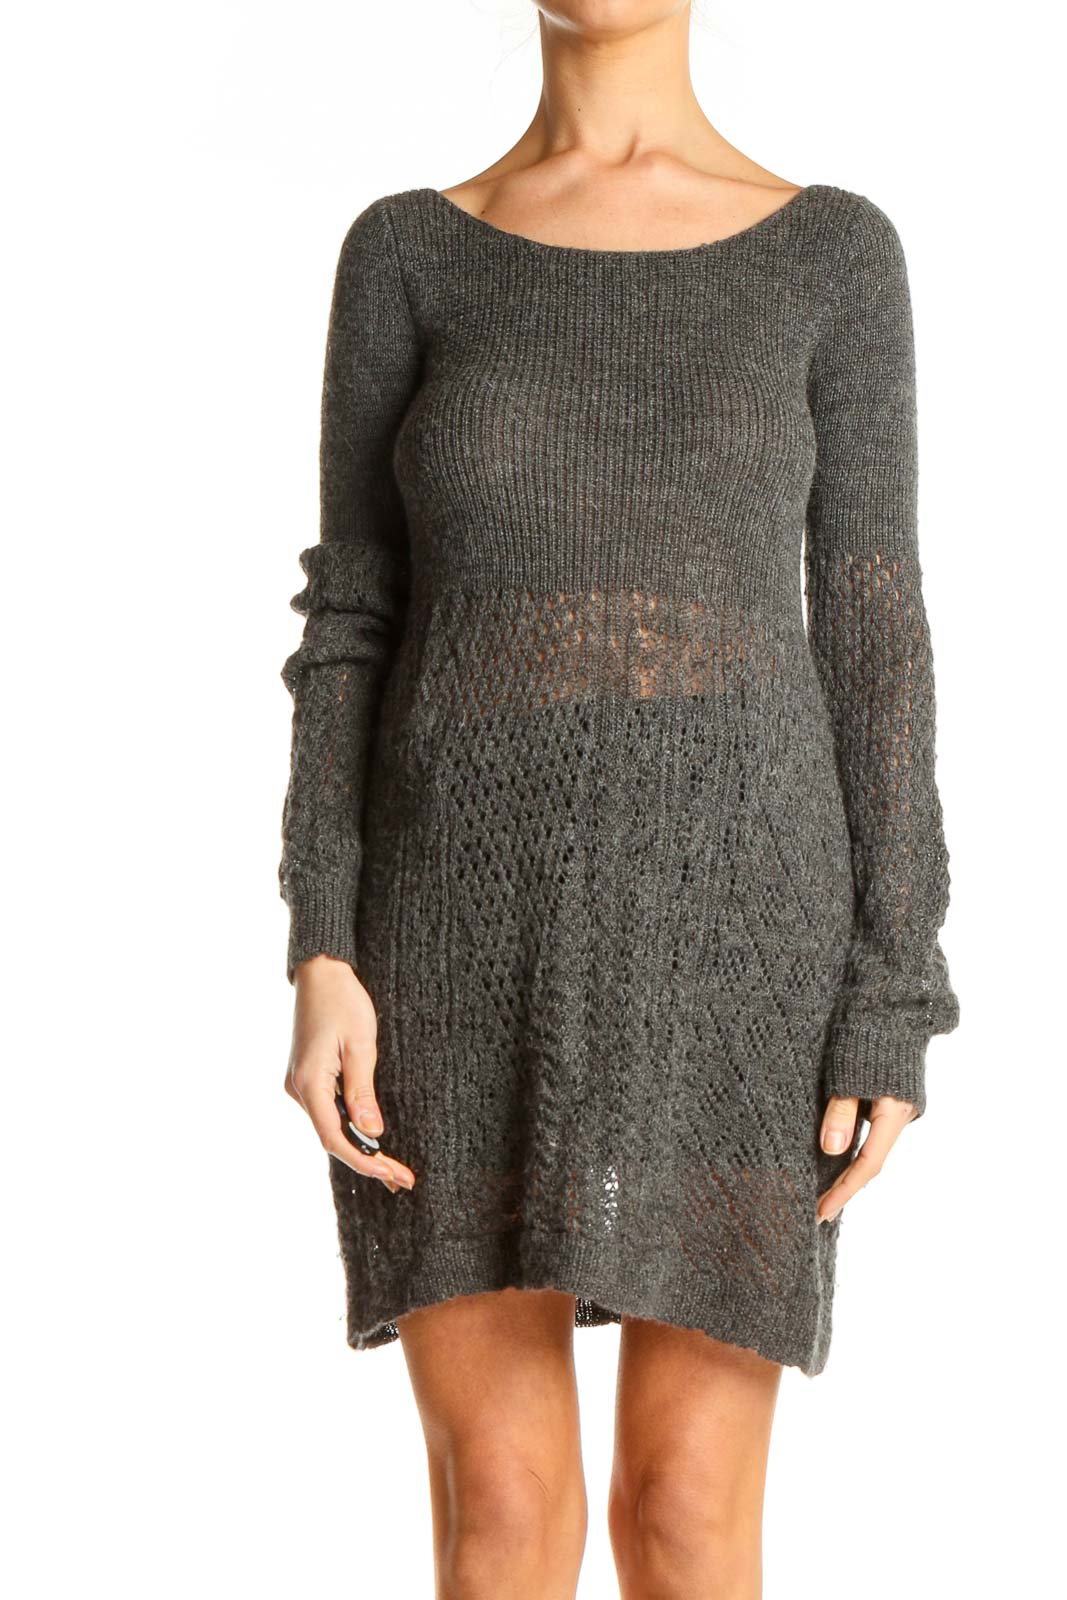 Gray Knit Dress Front